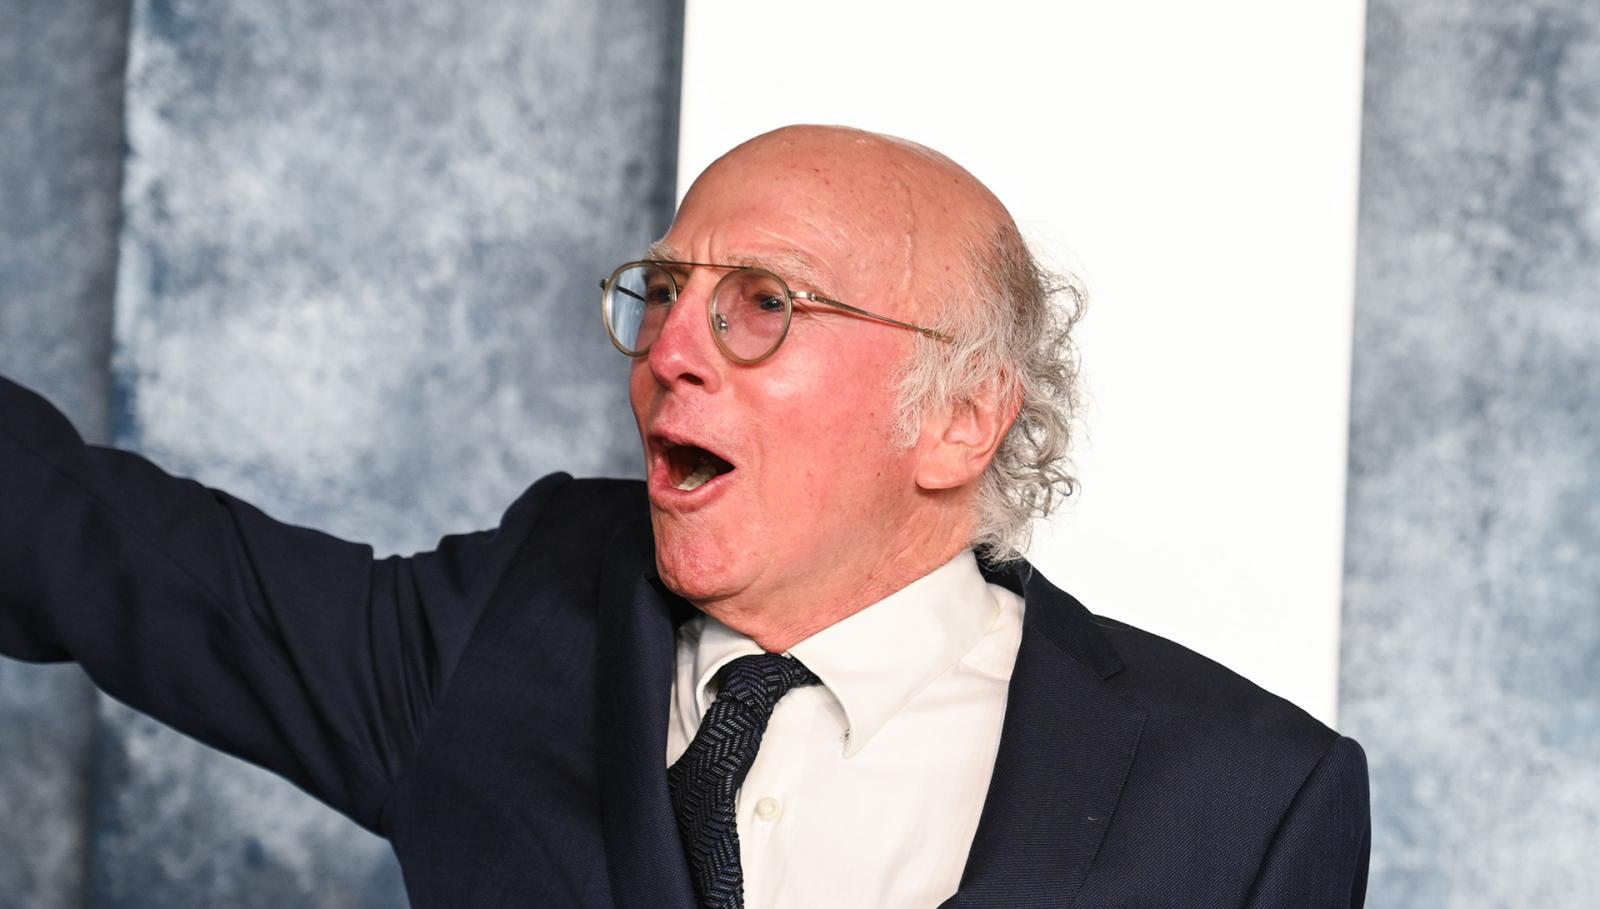 The Real Genius Behind Seinfeld Was Larry David All Along - image 1